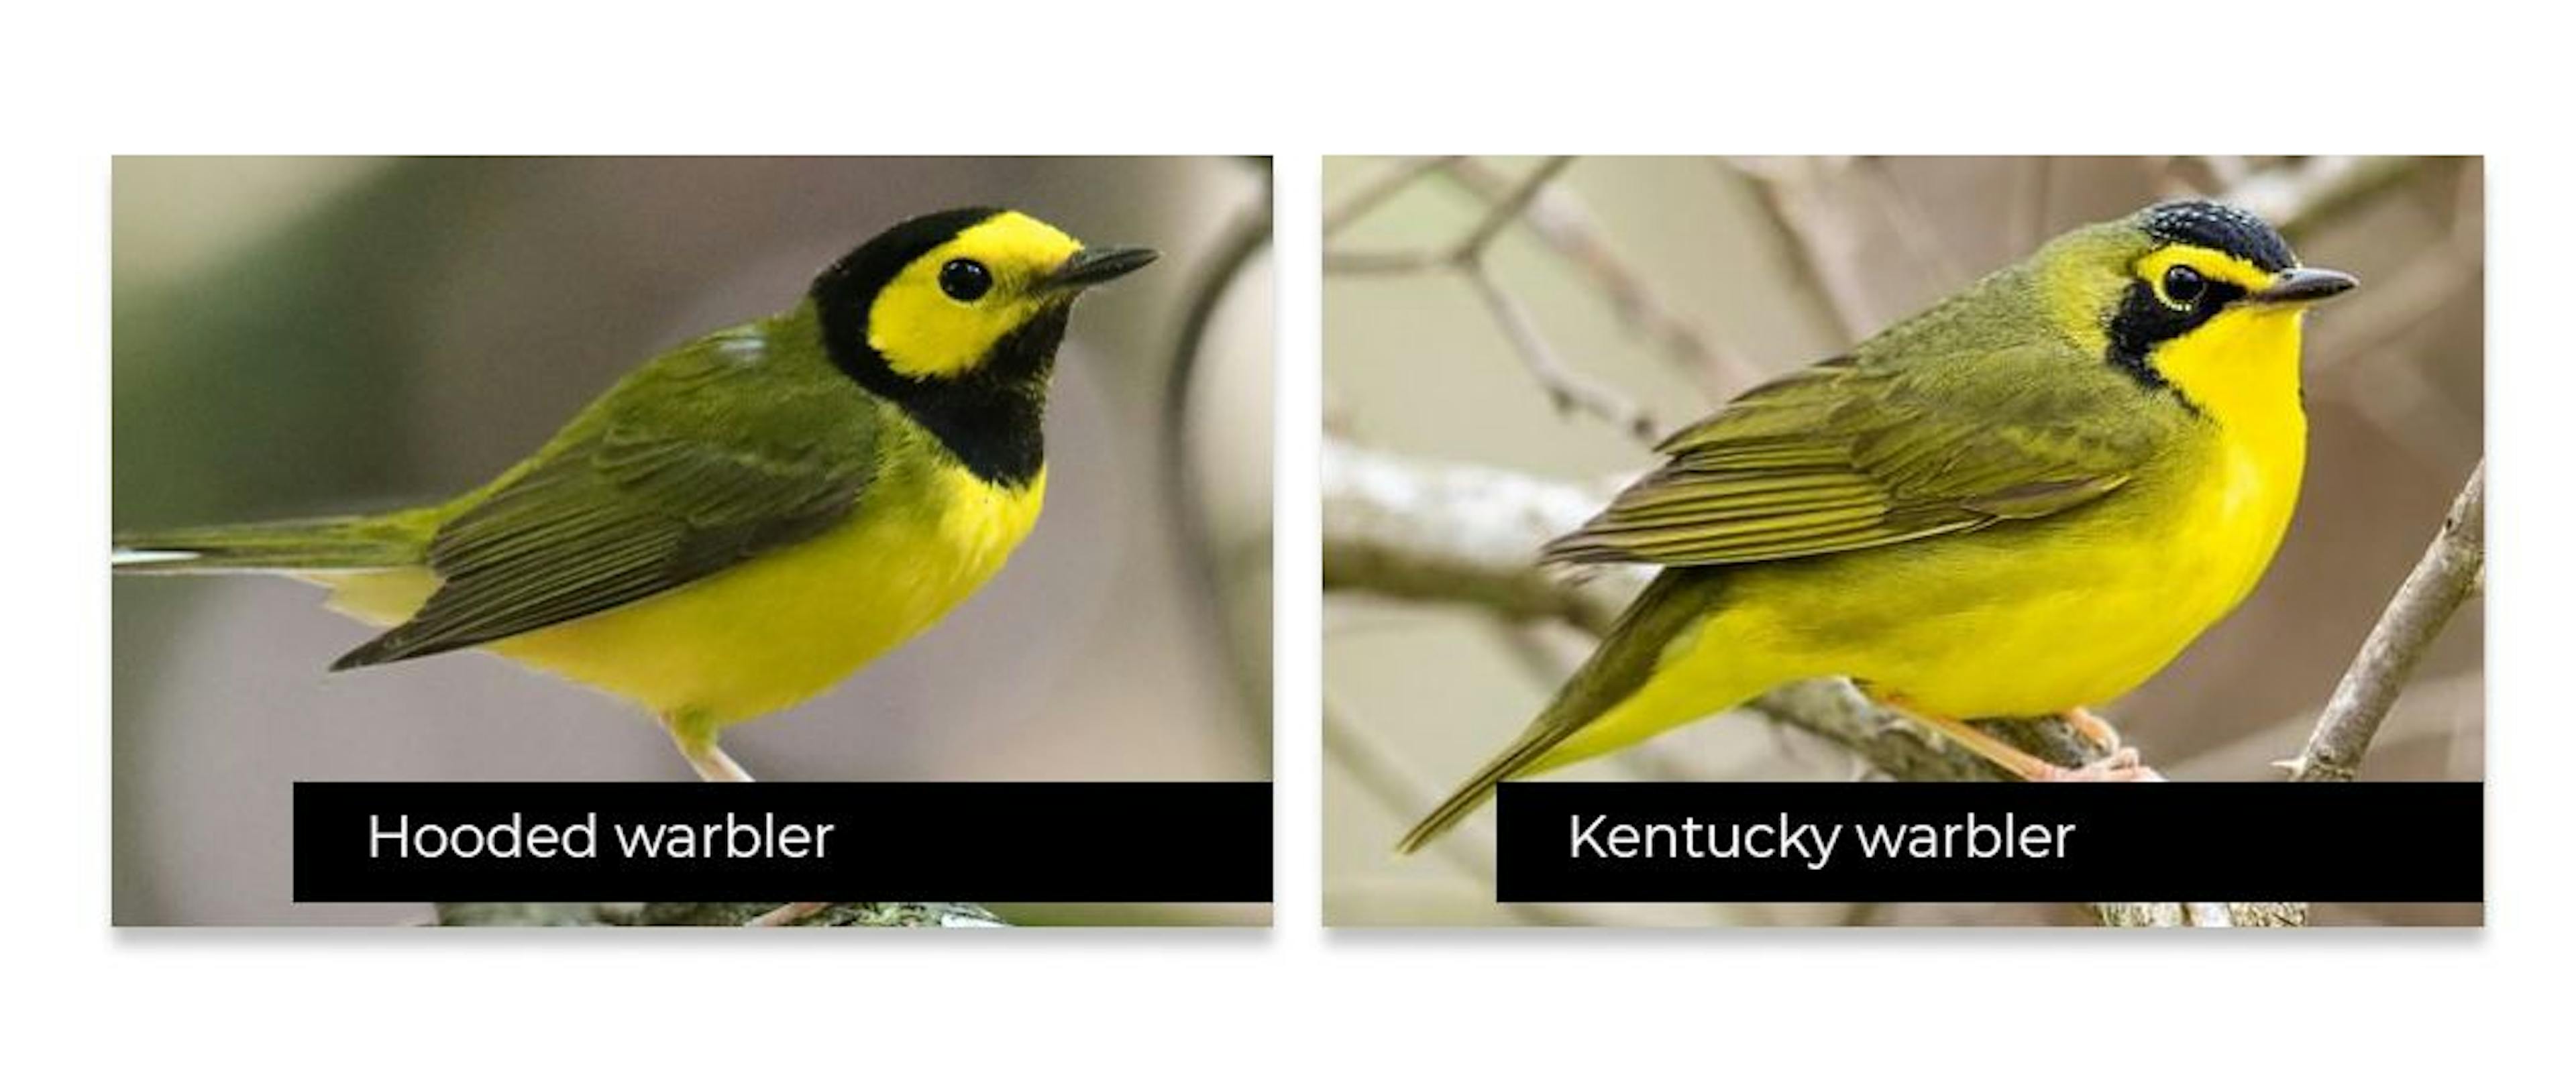 Some birds look very similar to each other, making it difficult to detect them accurately